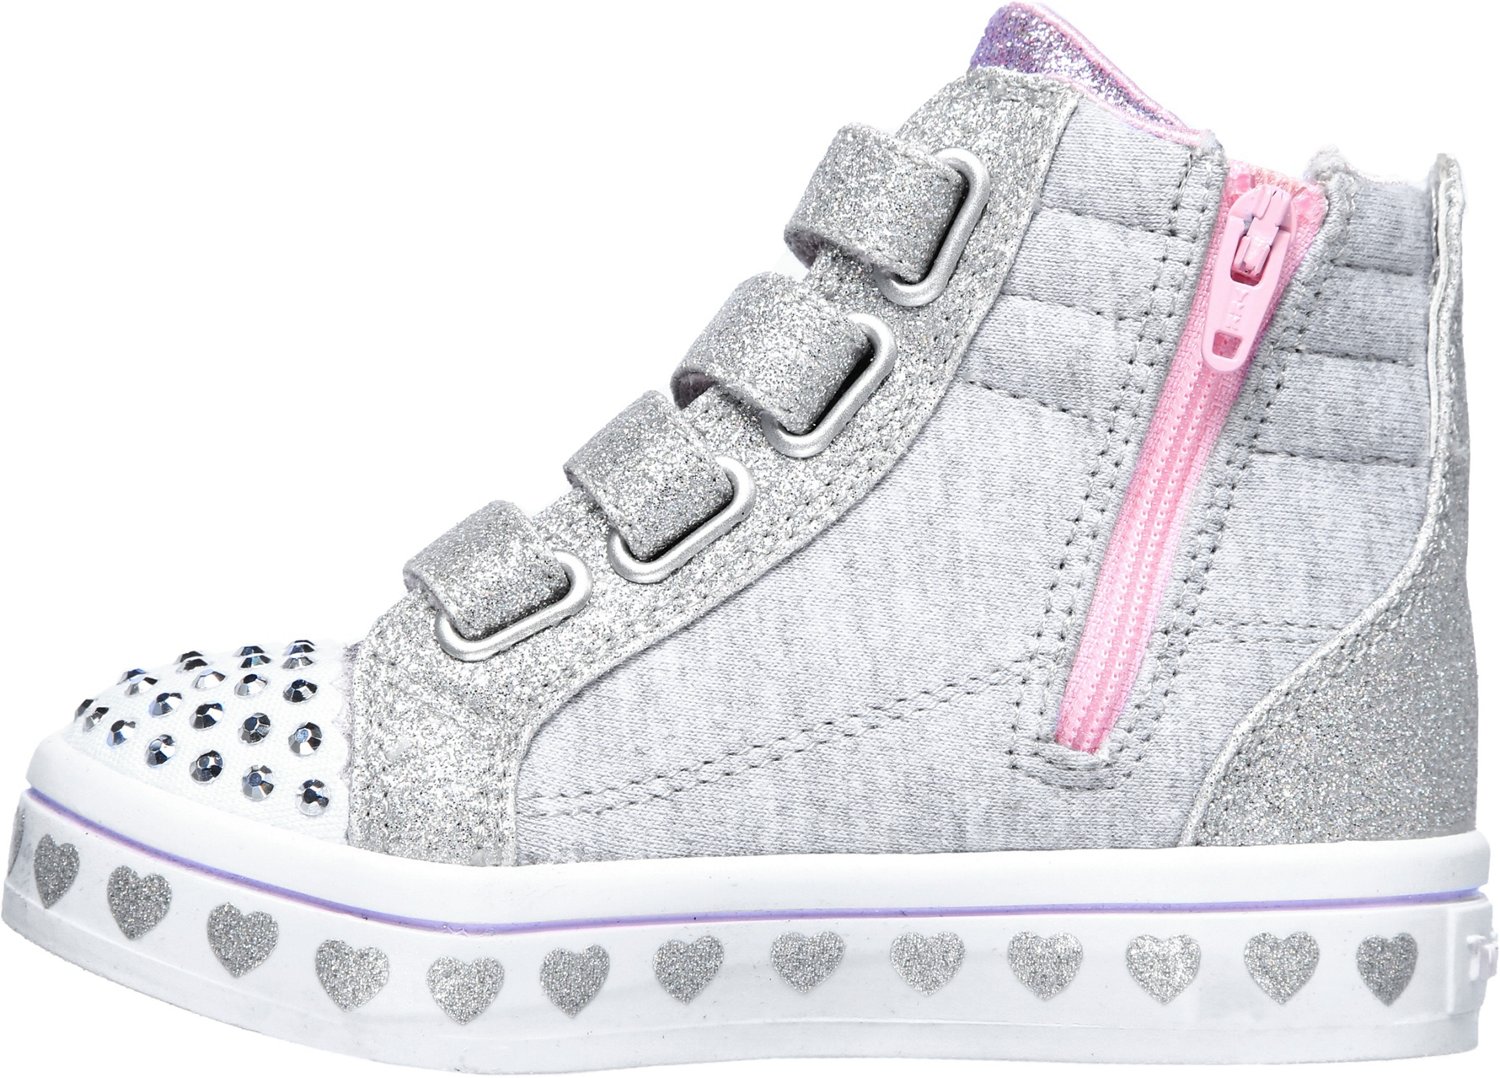 SKECHERS Toddler Girls' Twinkle Twi-Lites & Shine Shoes | Academy